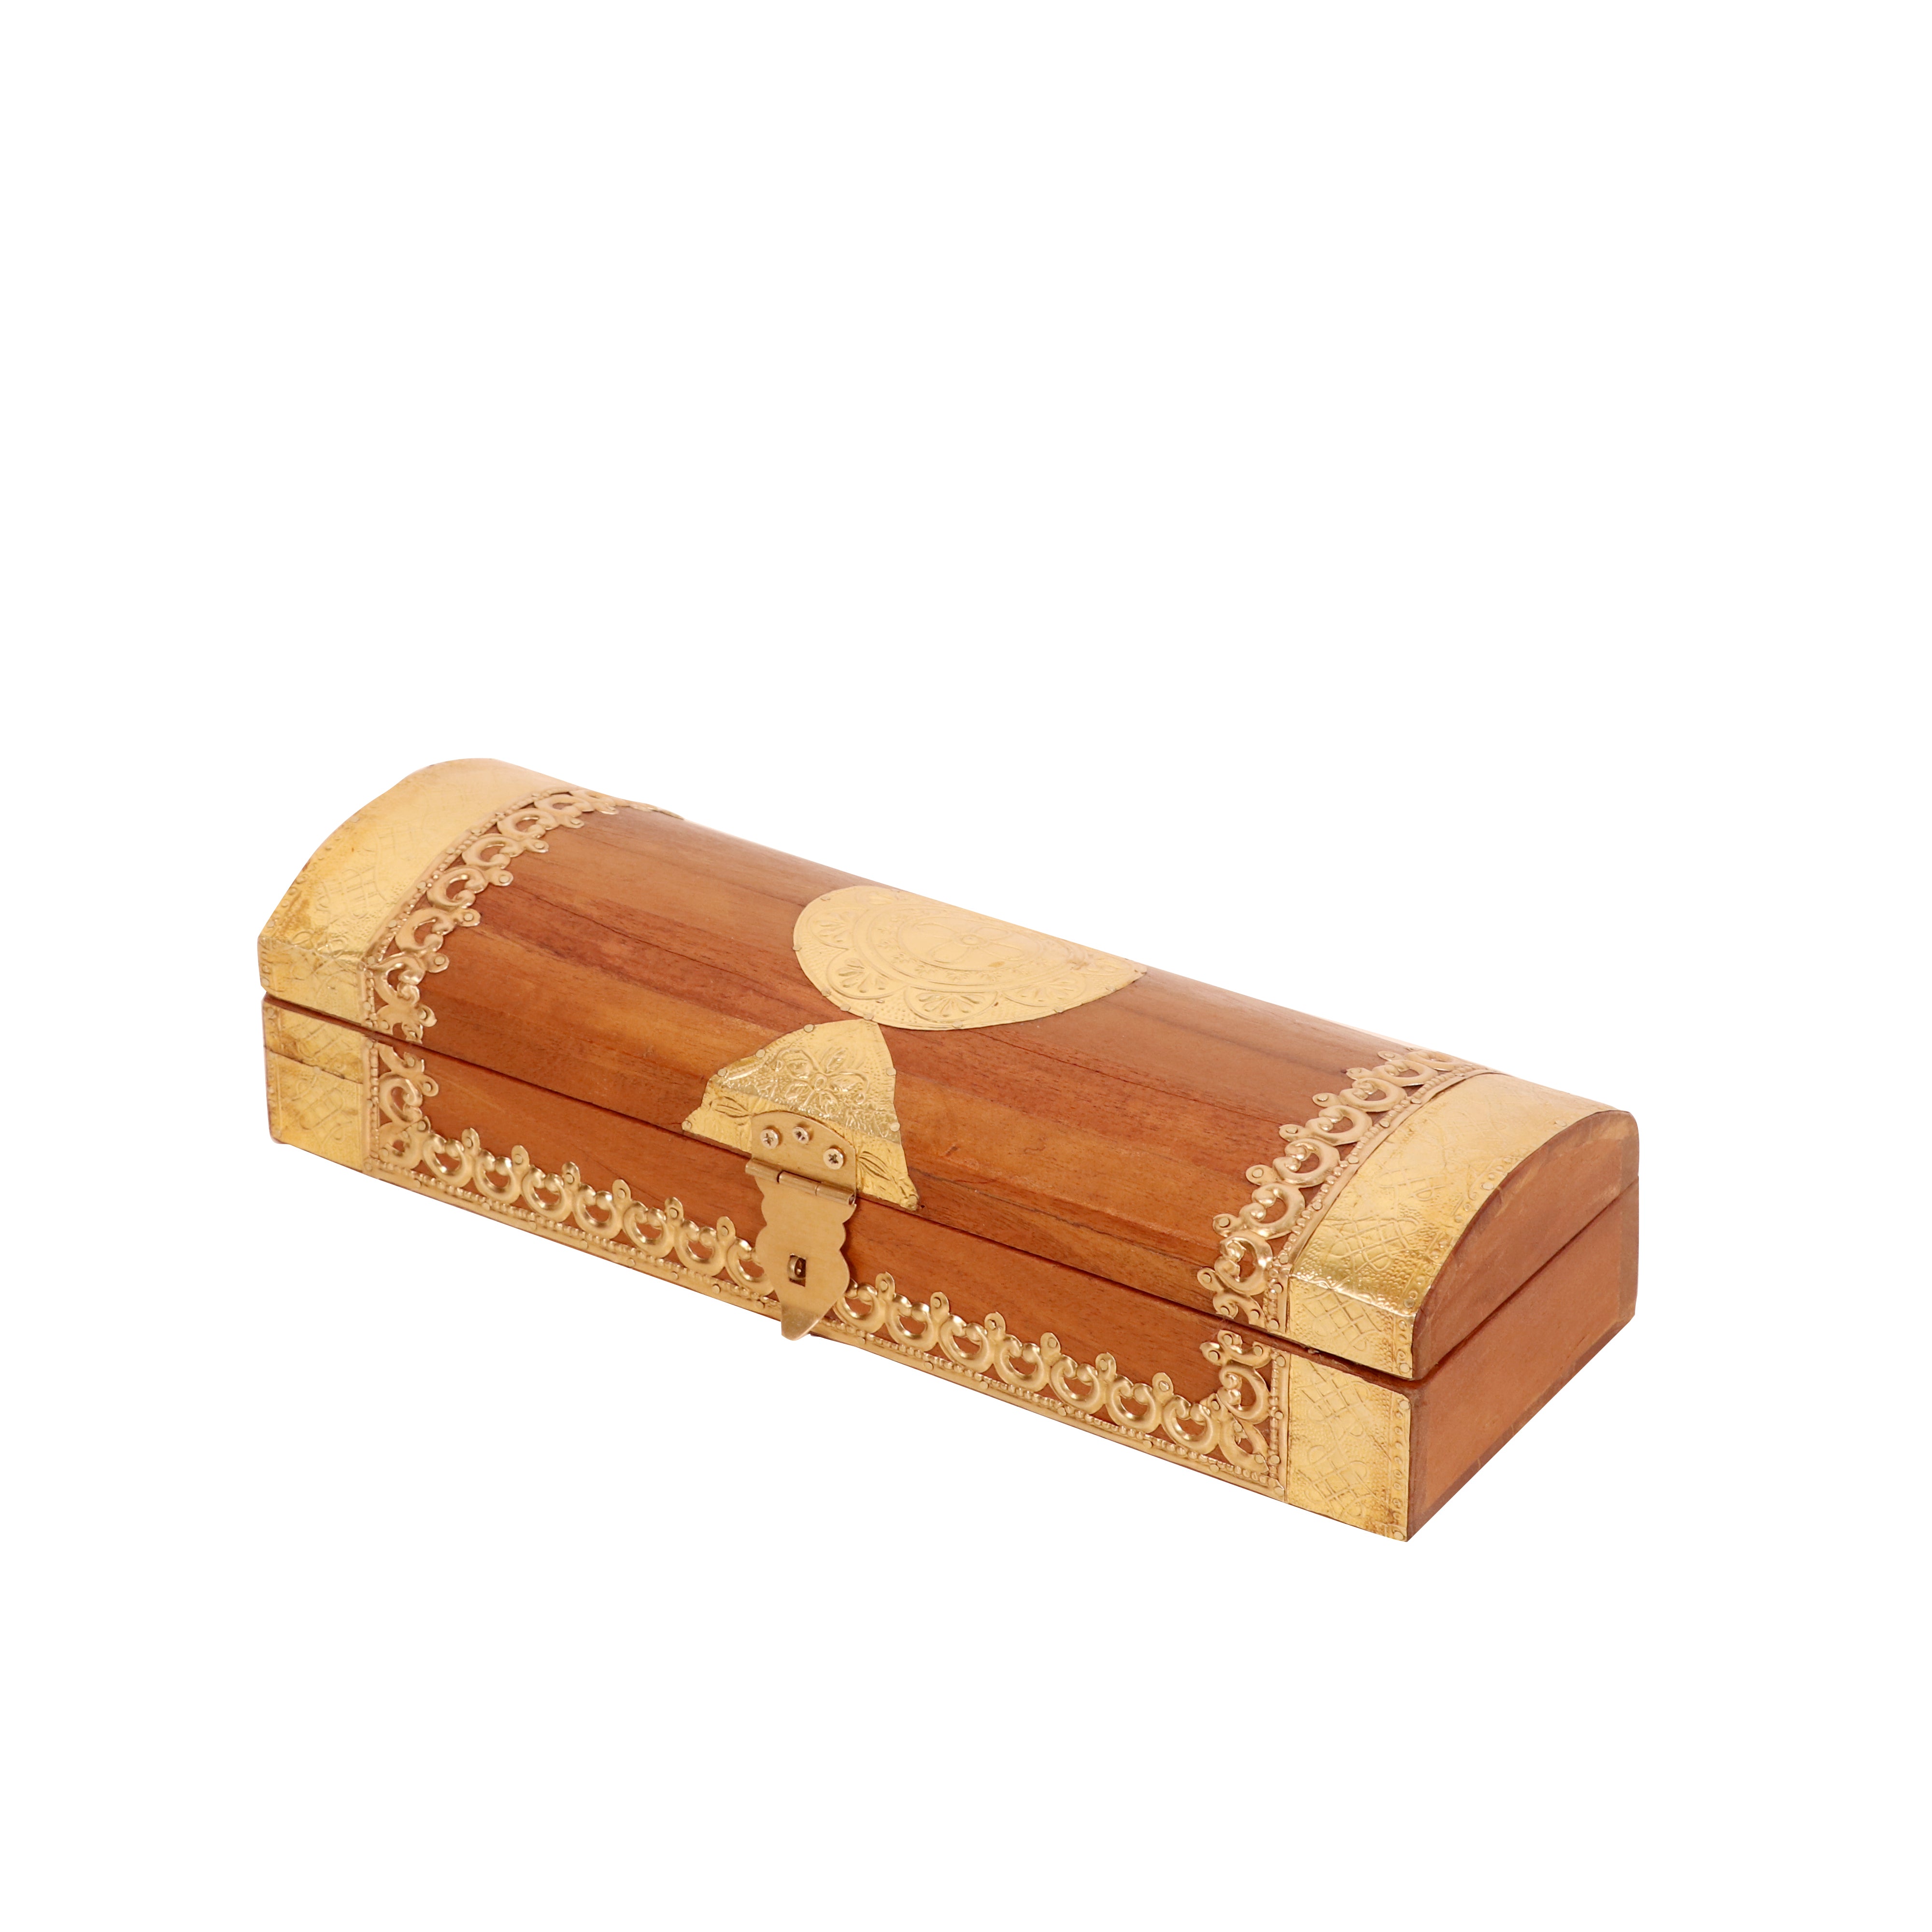 Brass fitted royal Latch Pen Pencil Case Wooden Box